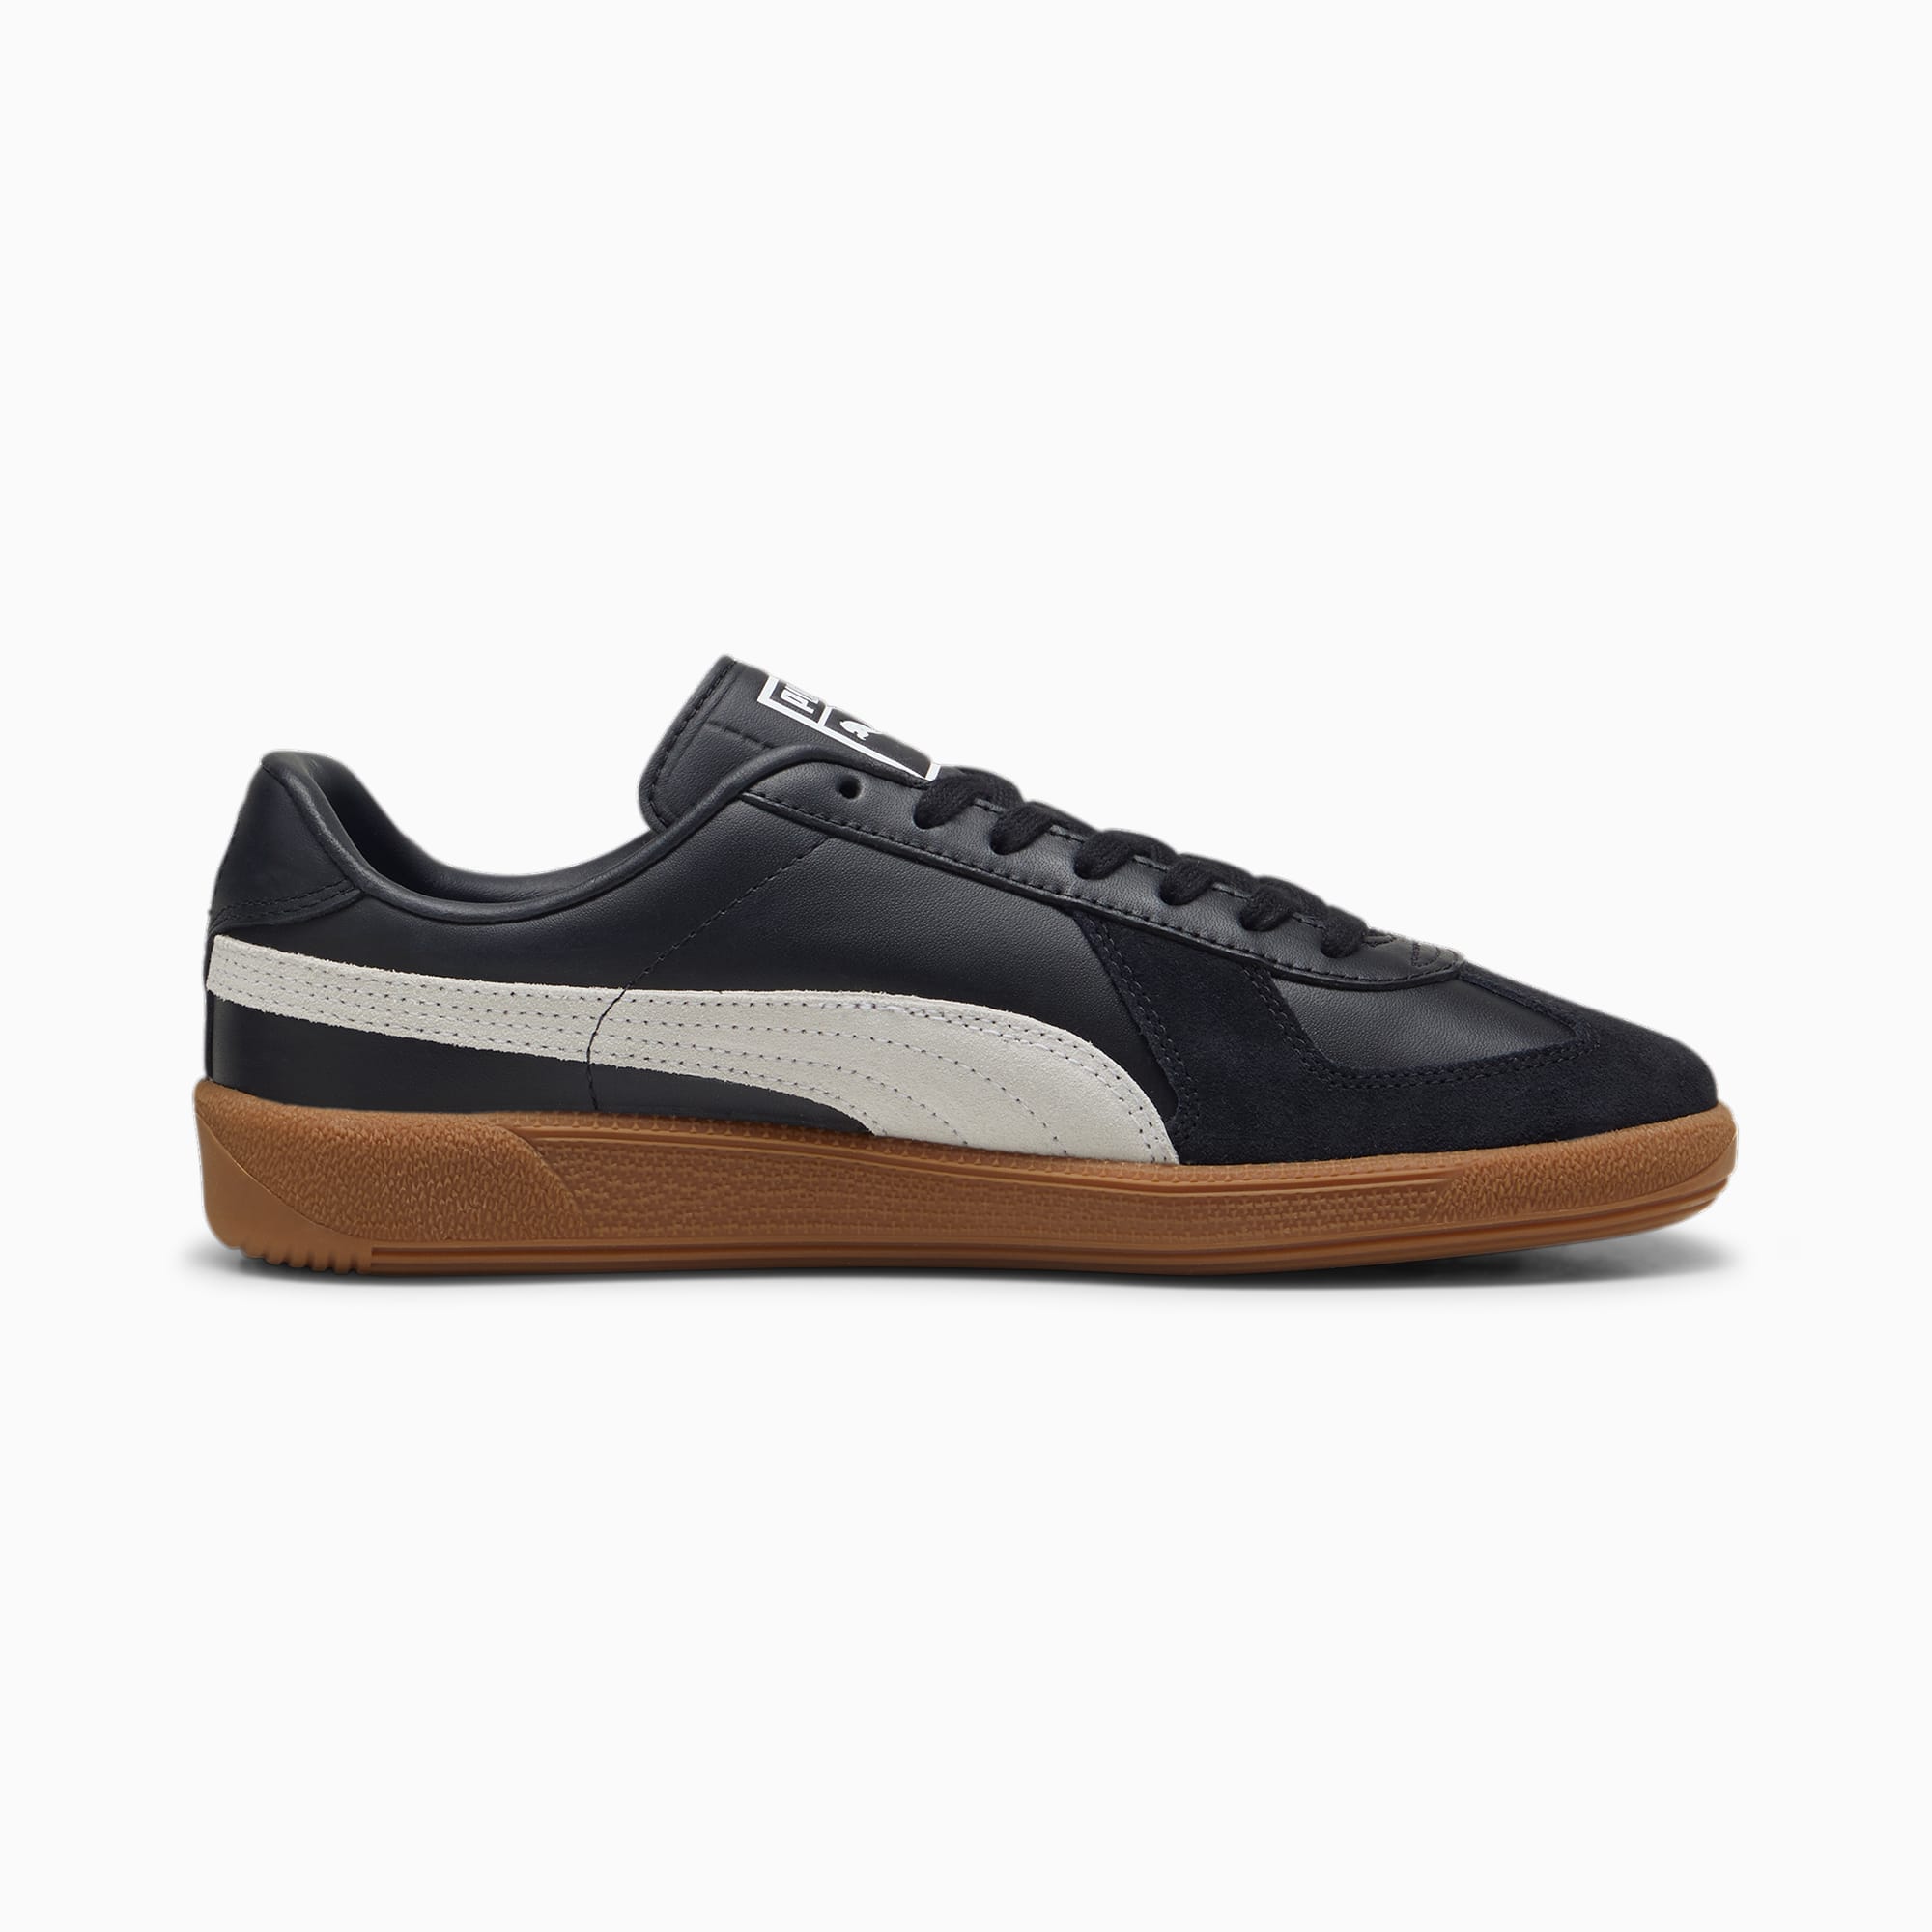 Women's PUMA Army Trainer Sneakers, Black/White/Gum, Size 36, Shoes